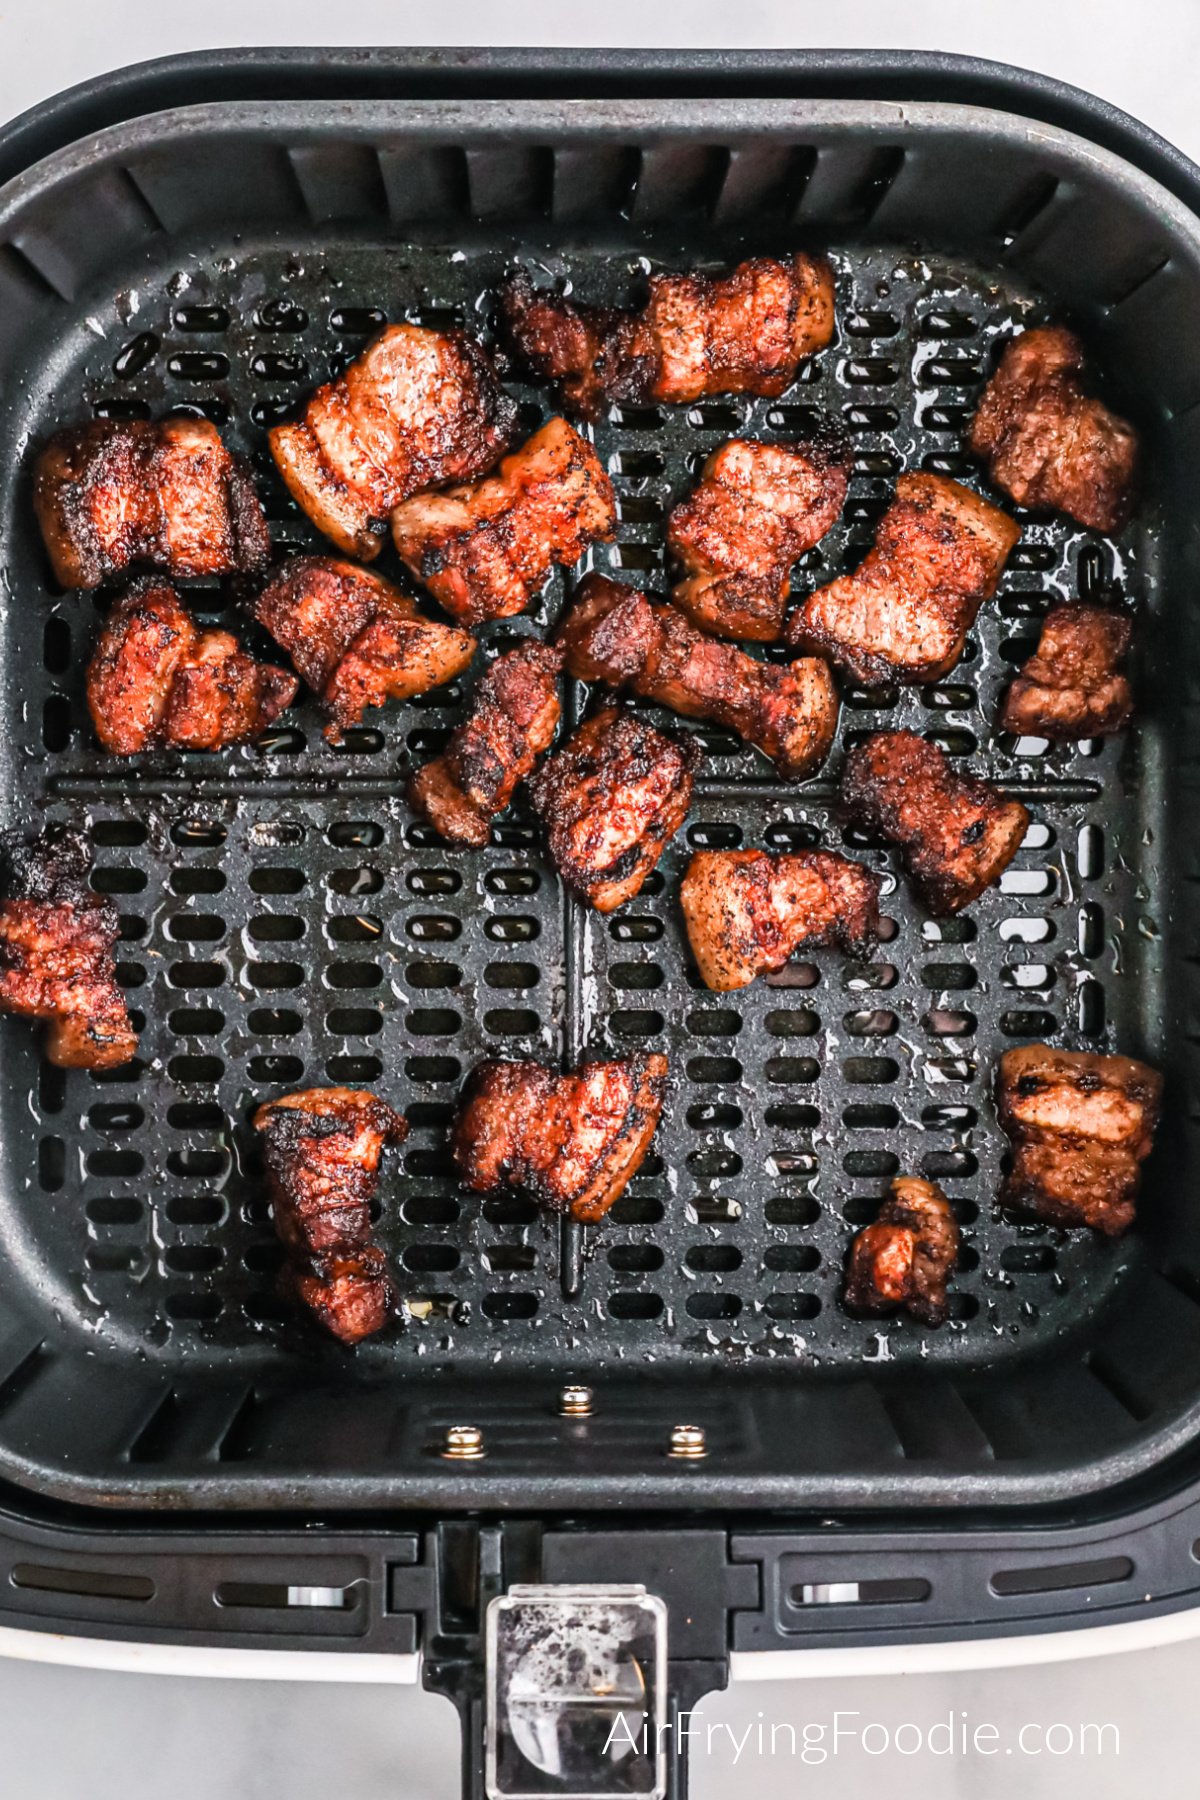 Fried pork belly bites in the basket of the air fryer.